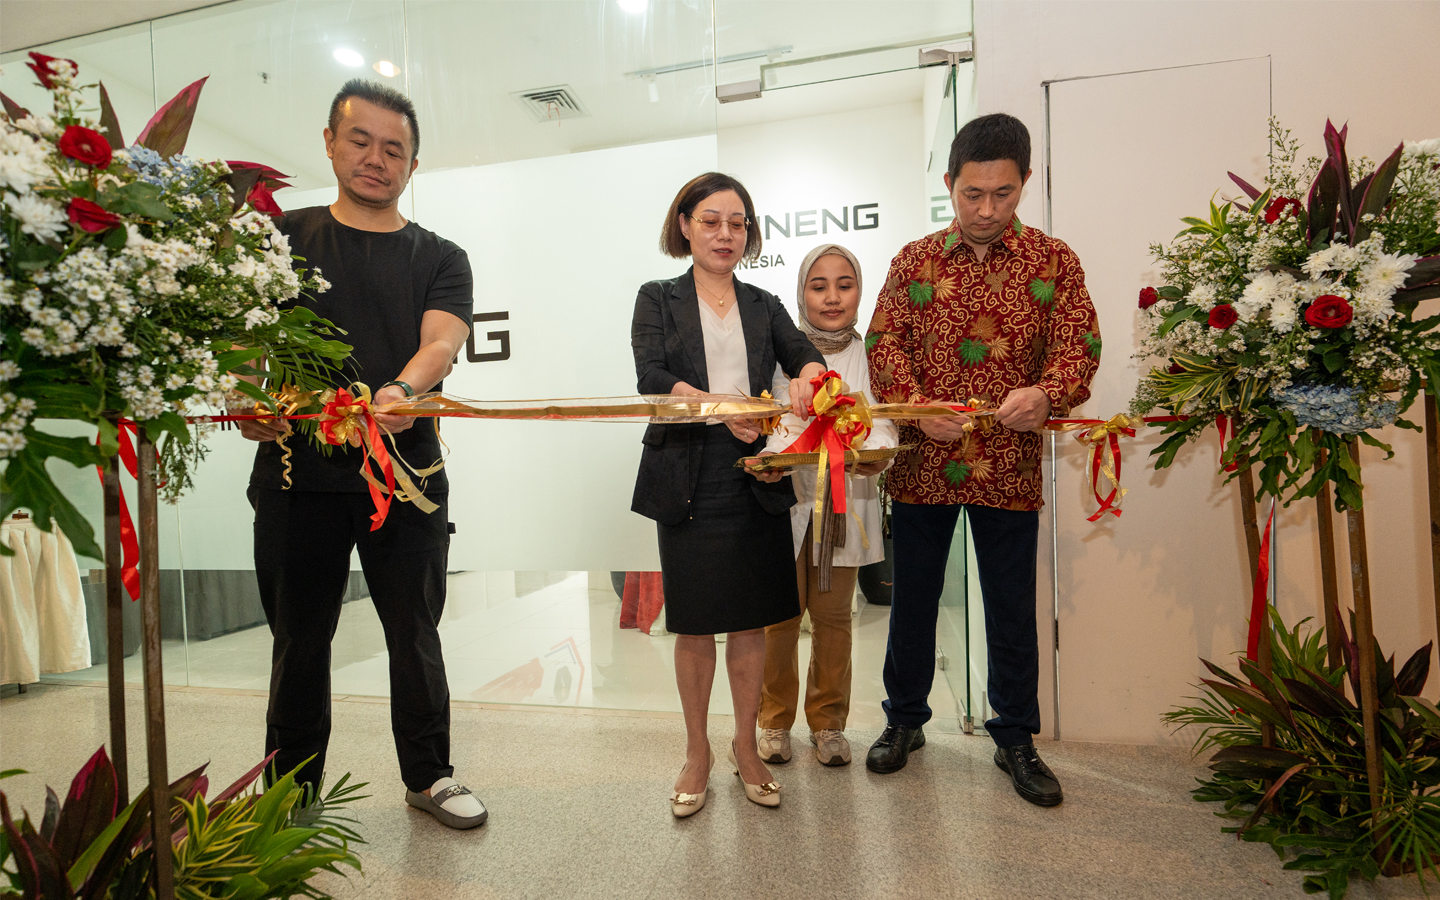 Tianneng Group Indonesia Office Grand Opening